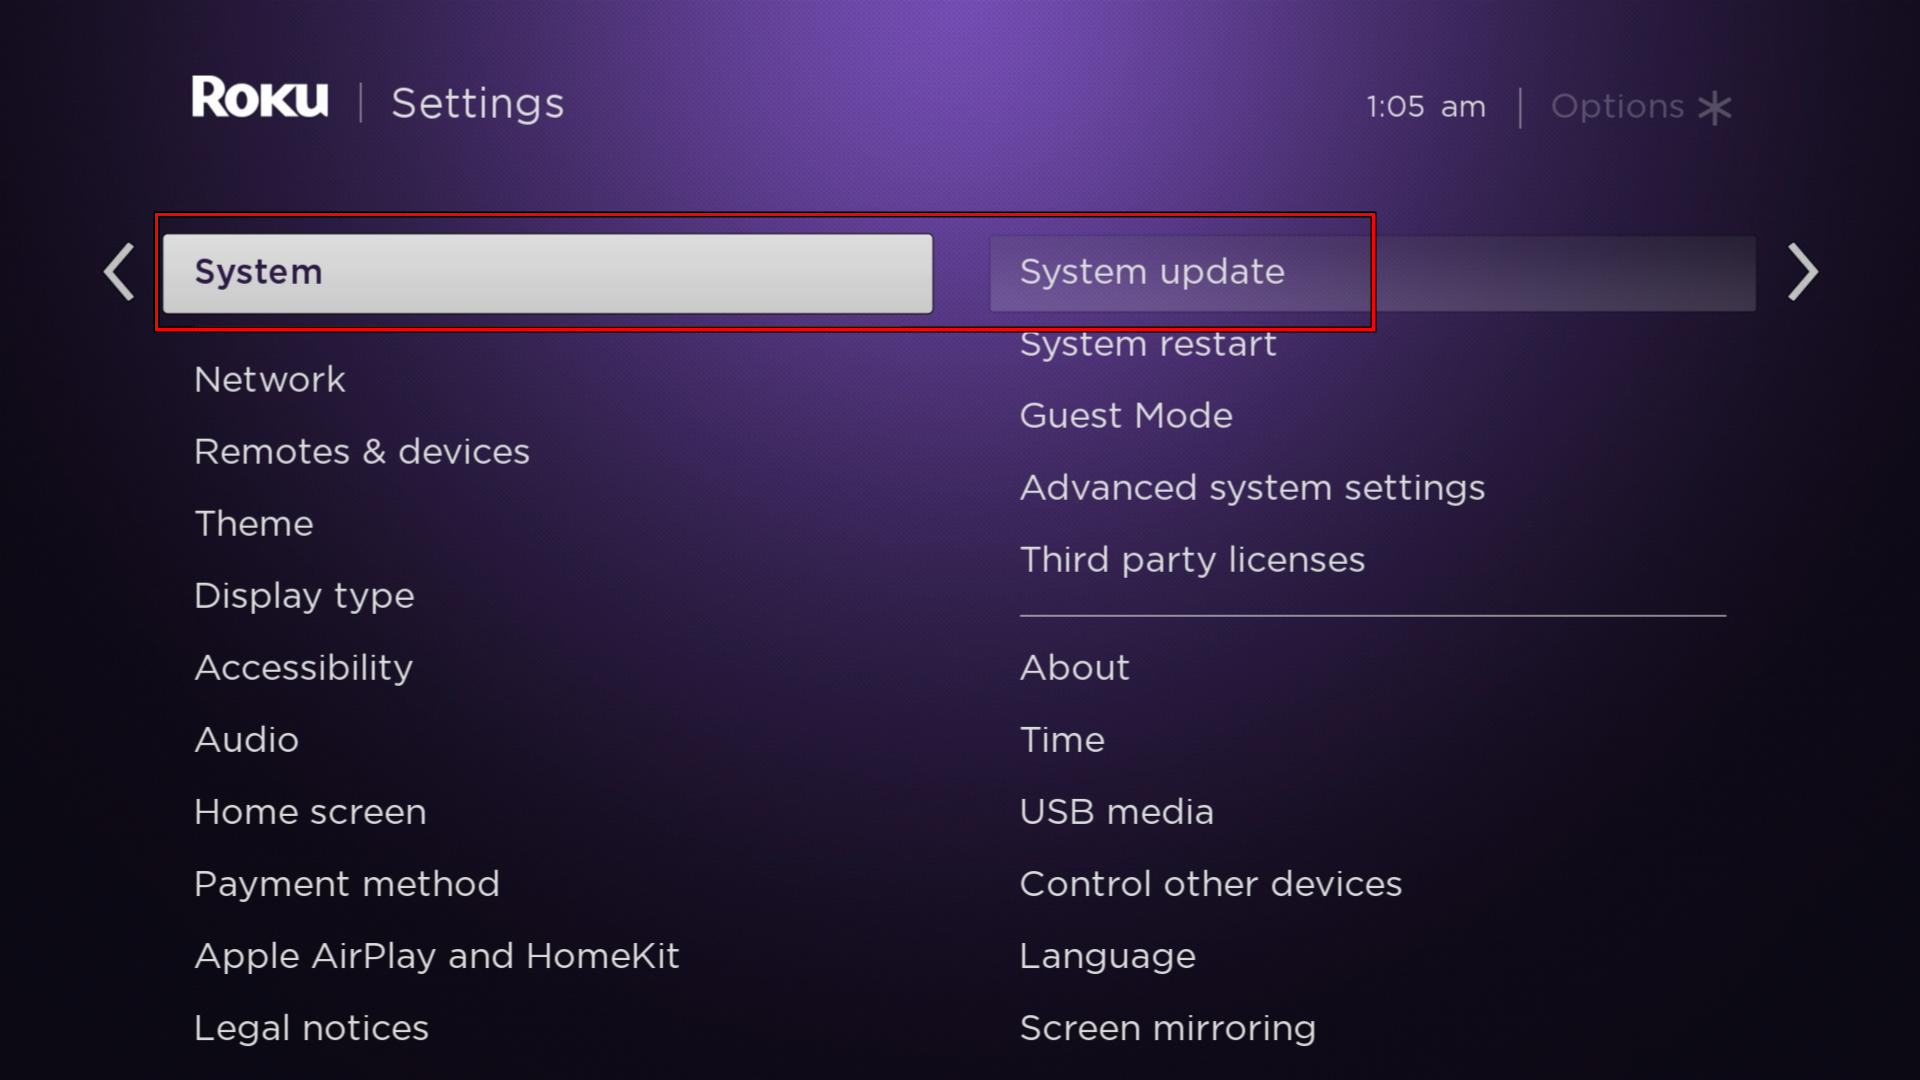 Open System Update in the Roku System Settings